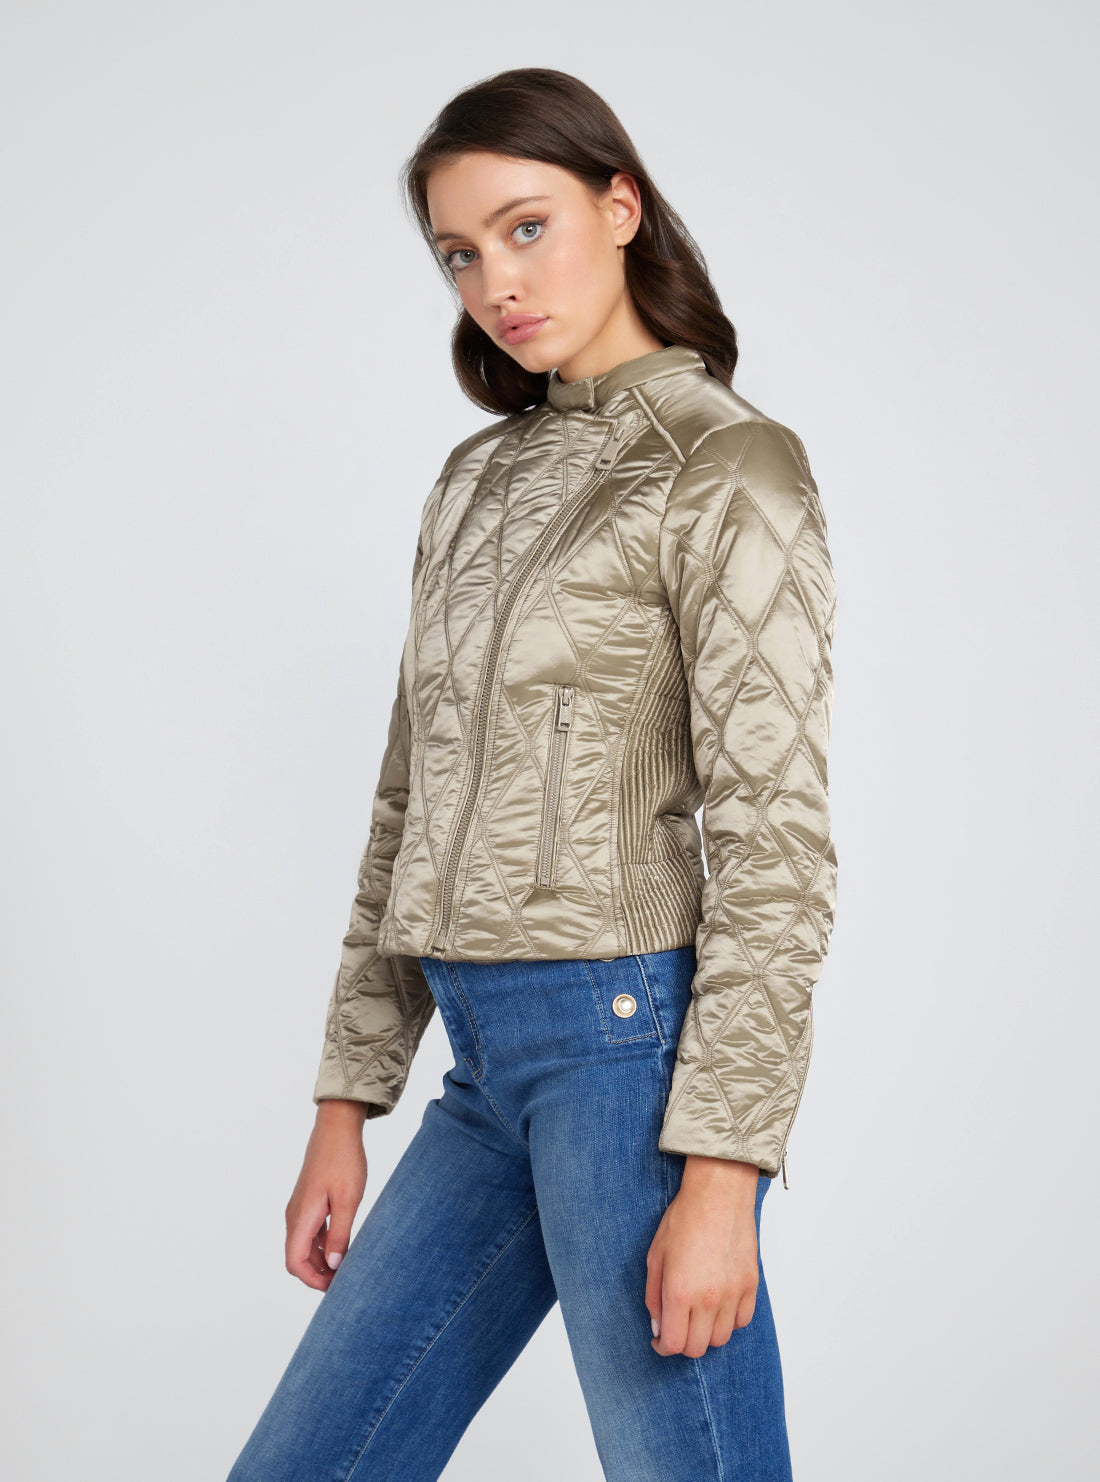 GUESS Eco Gold New Marine Jacket side view